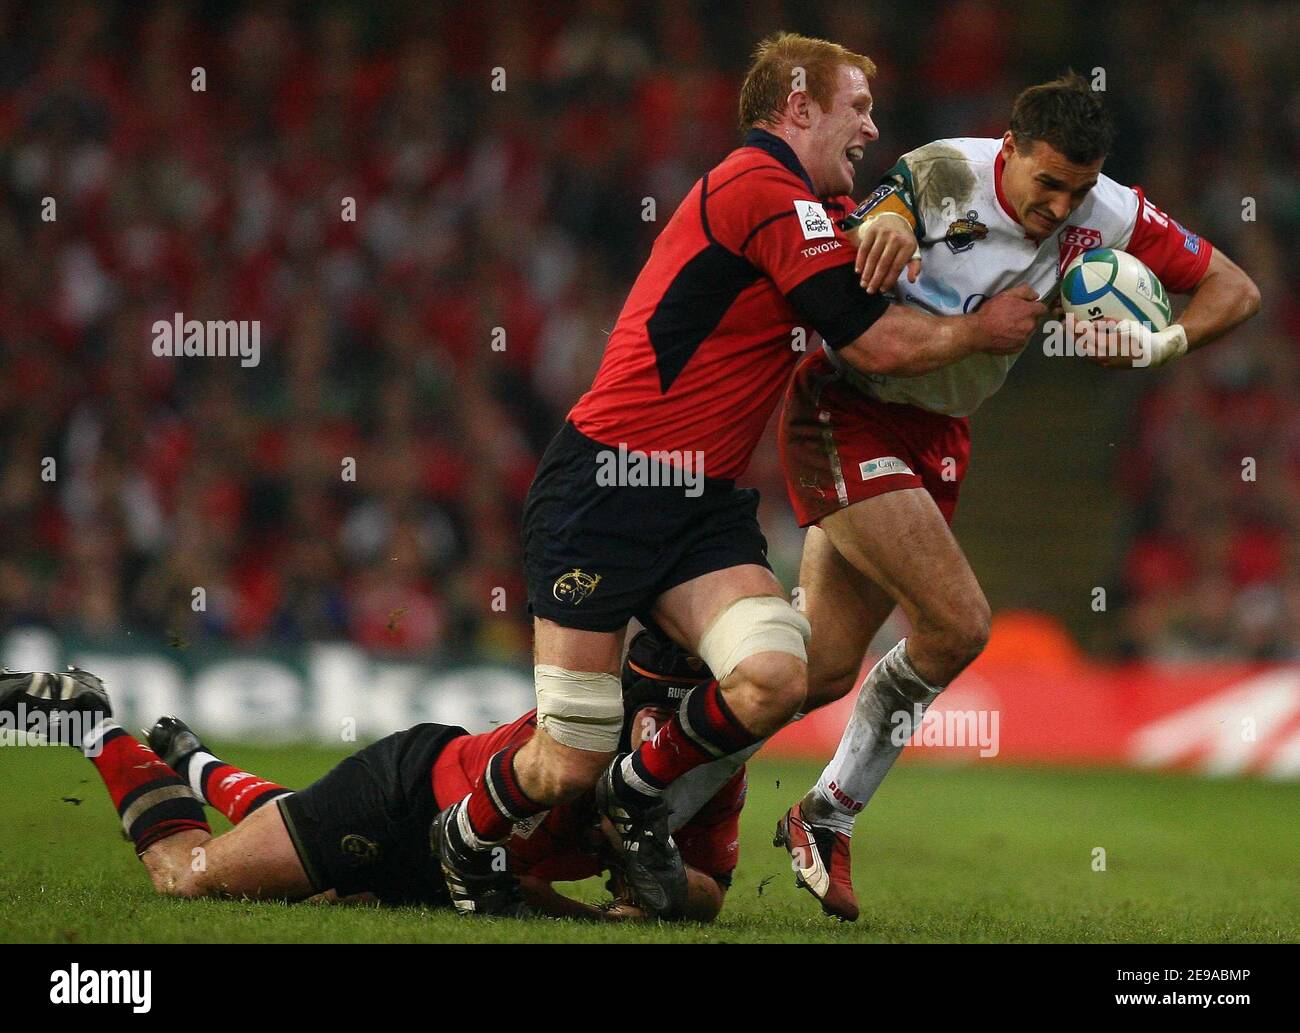 Biarritz's Nicolas Brusque tackled by Munster's Paul O'Connel during the Heineken Cup final, Munster vs Biarritz, at the Millennium Stadium, Cardiff, Wales, on May 20, 2006. Munster won 23-19. Photo by Christian Liewig/ABACAPRESS.COM Stock Photo